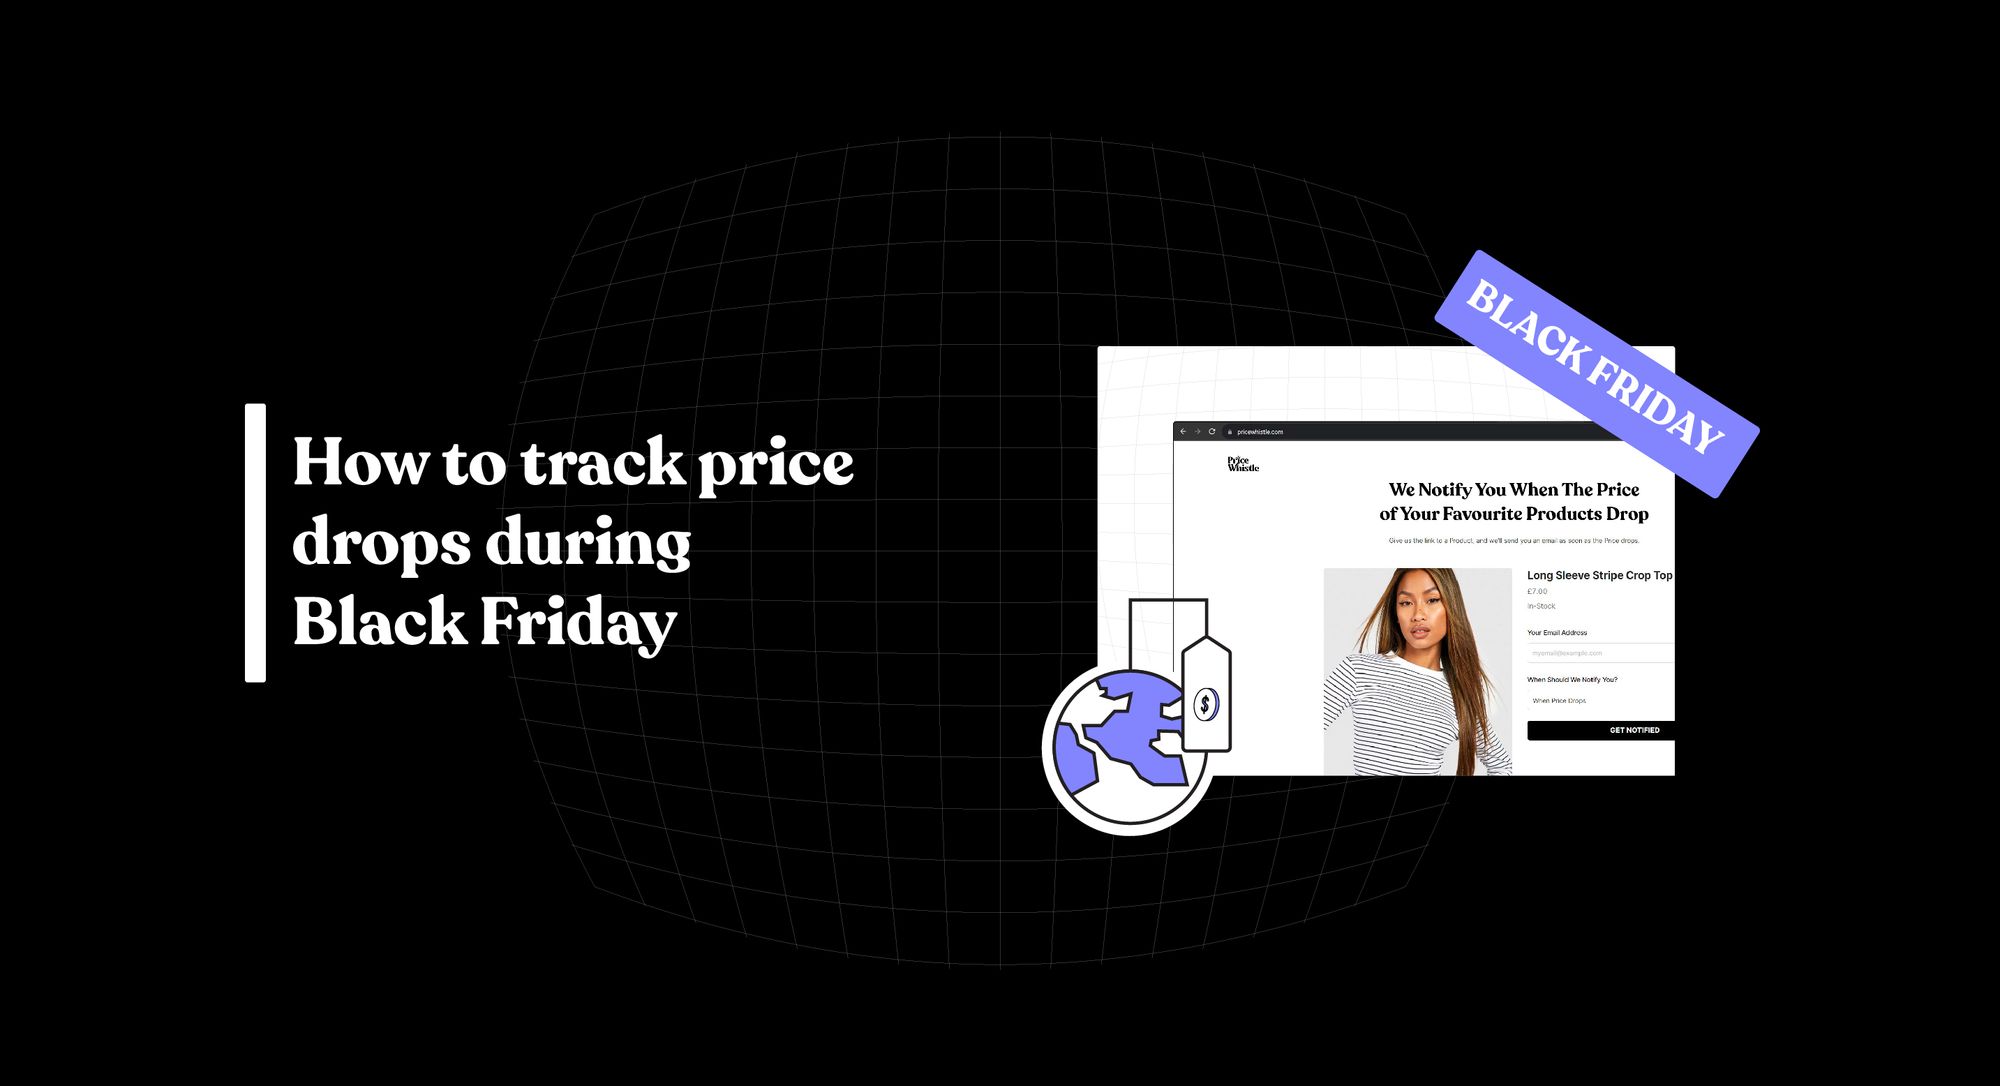 How to track price drops during Black Friday